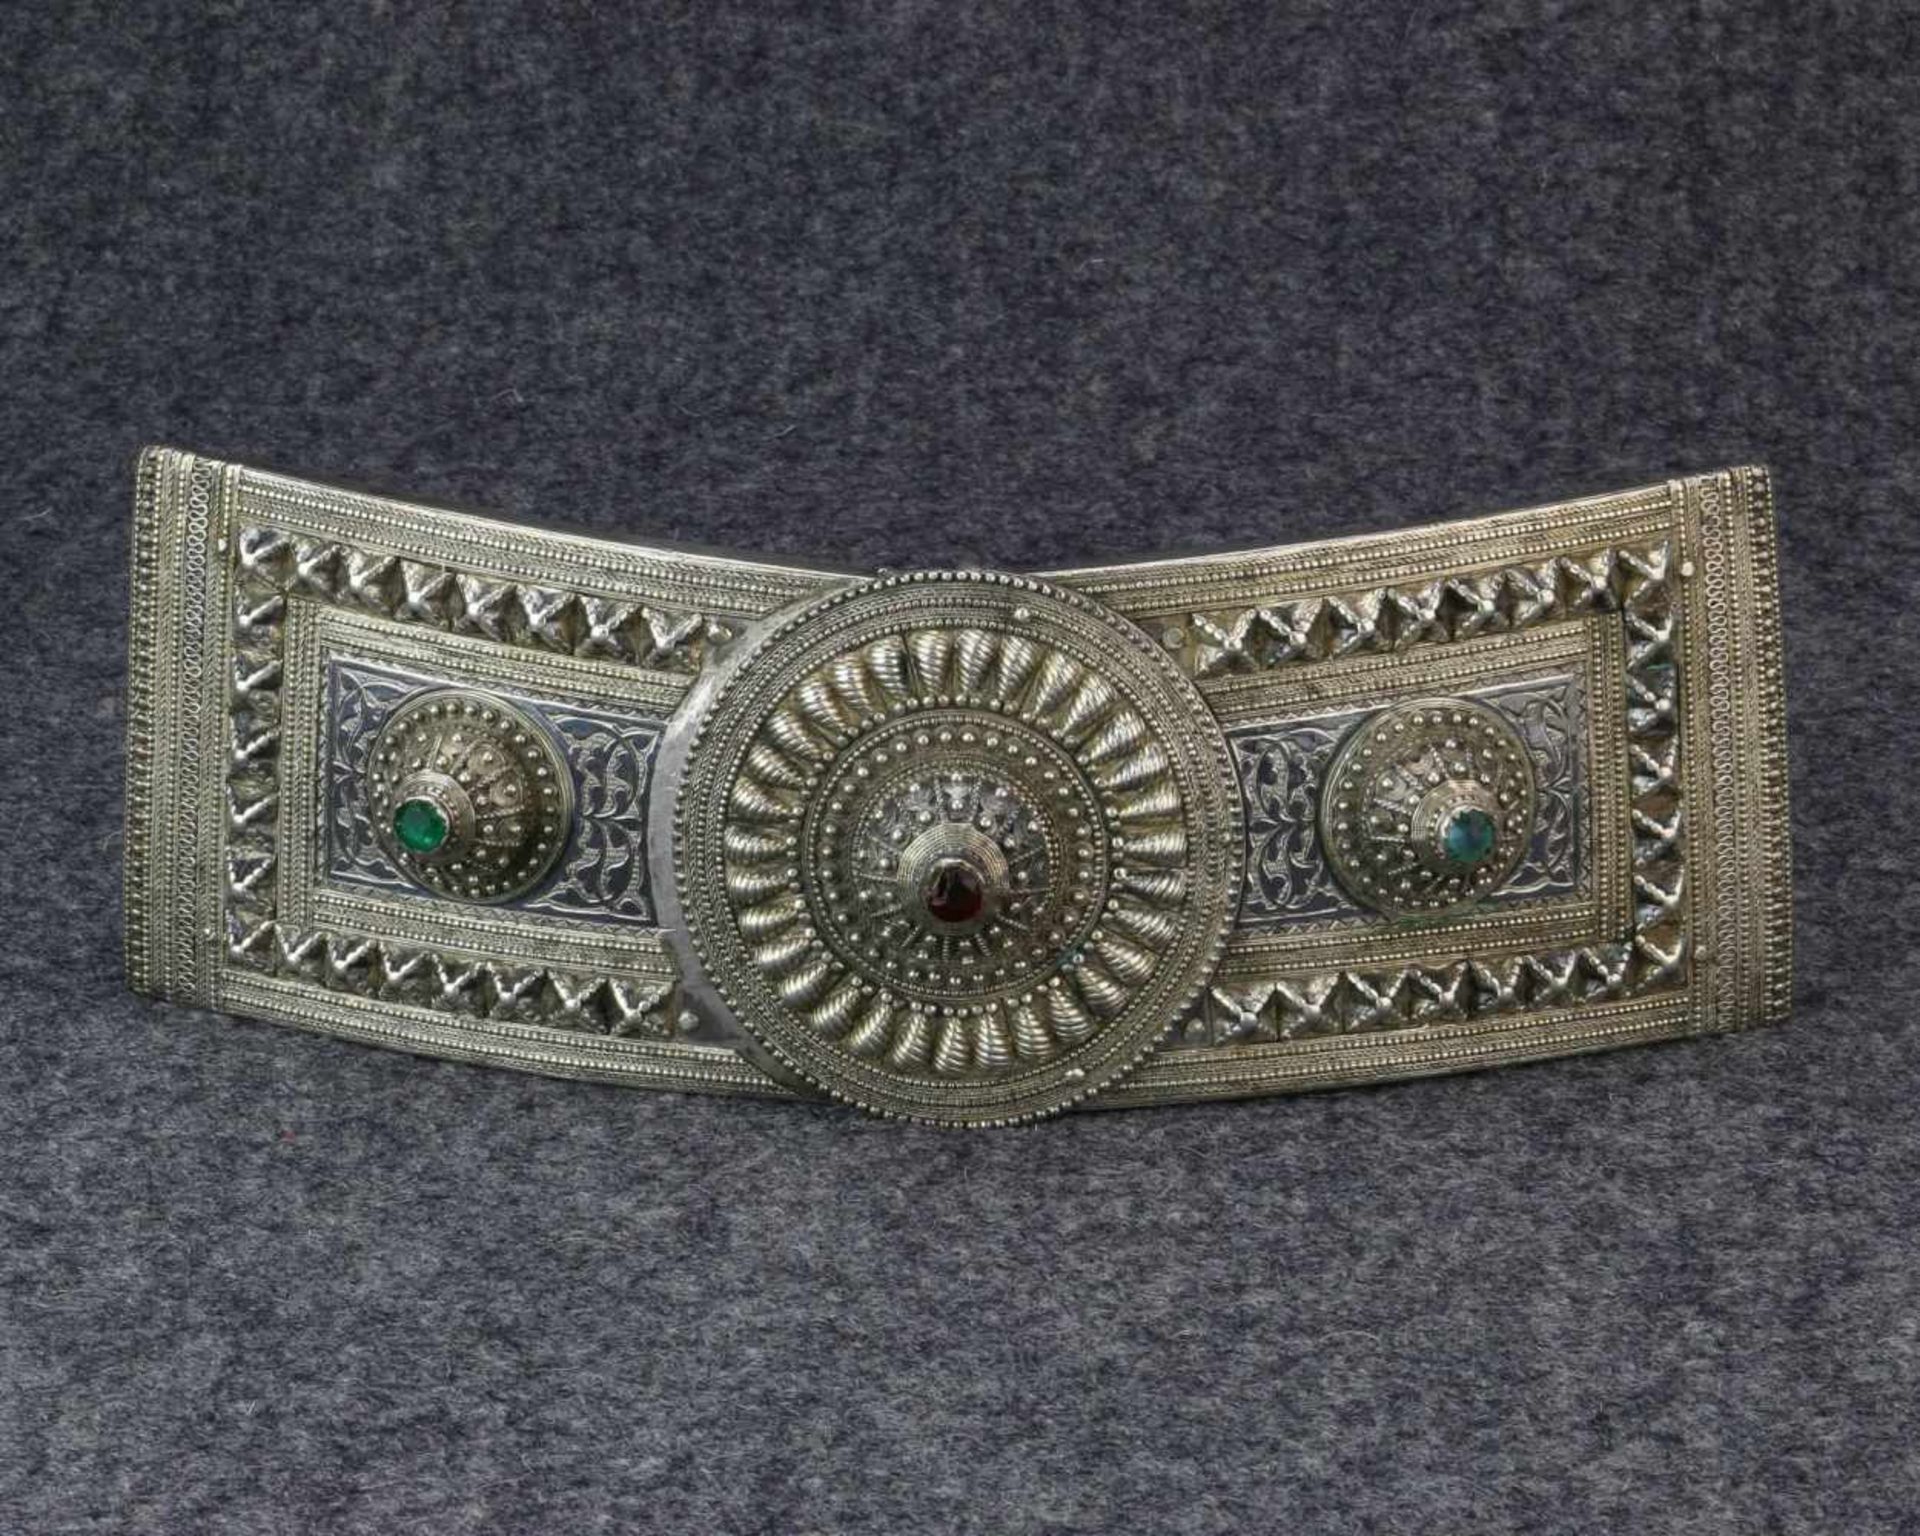 Kaukasus, Dagestan, Azerbaijan and Armenia, two part men's belt buckle,decorated with niello, floral